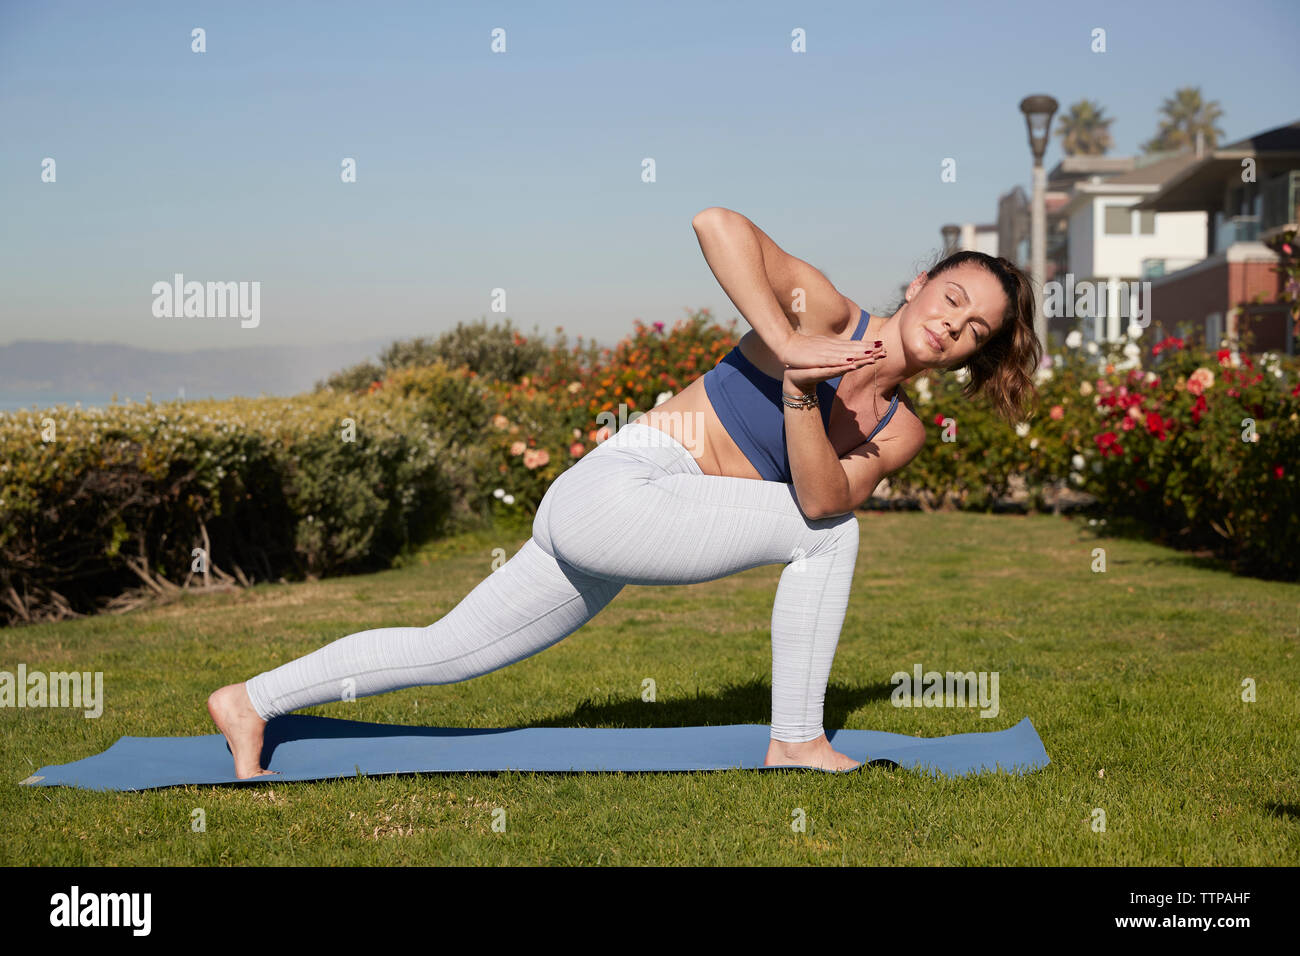 Full length of woman with legs apart and hands clasped practicing yoga on exercise mat Stock Photo